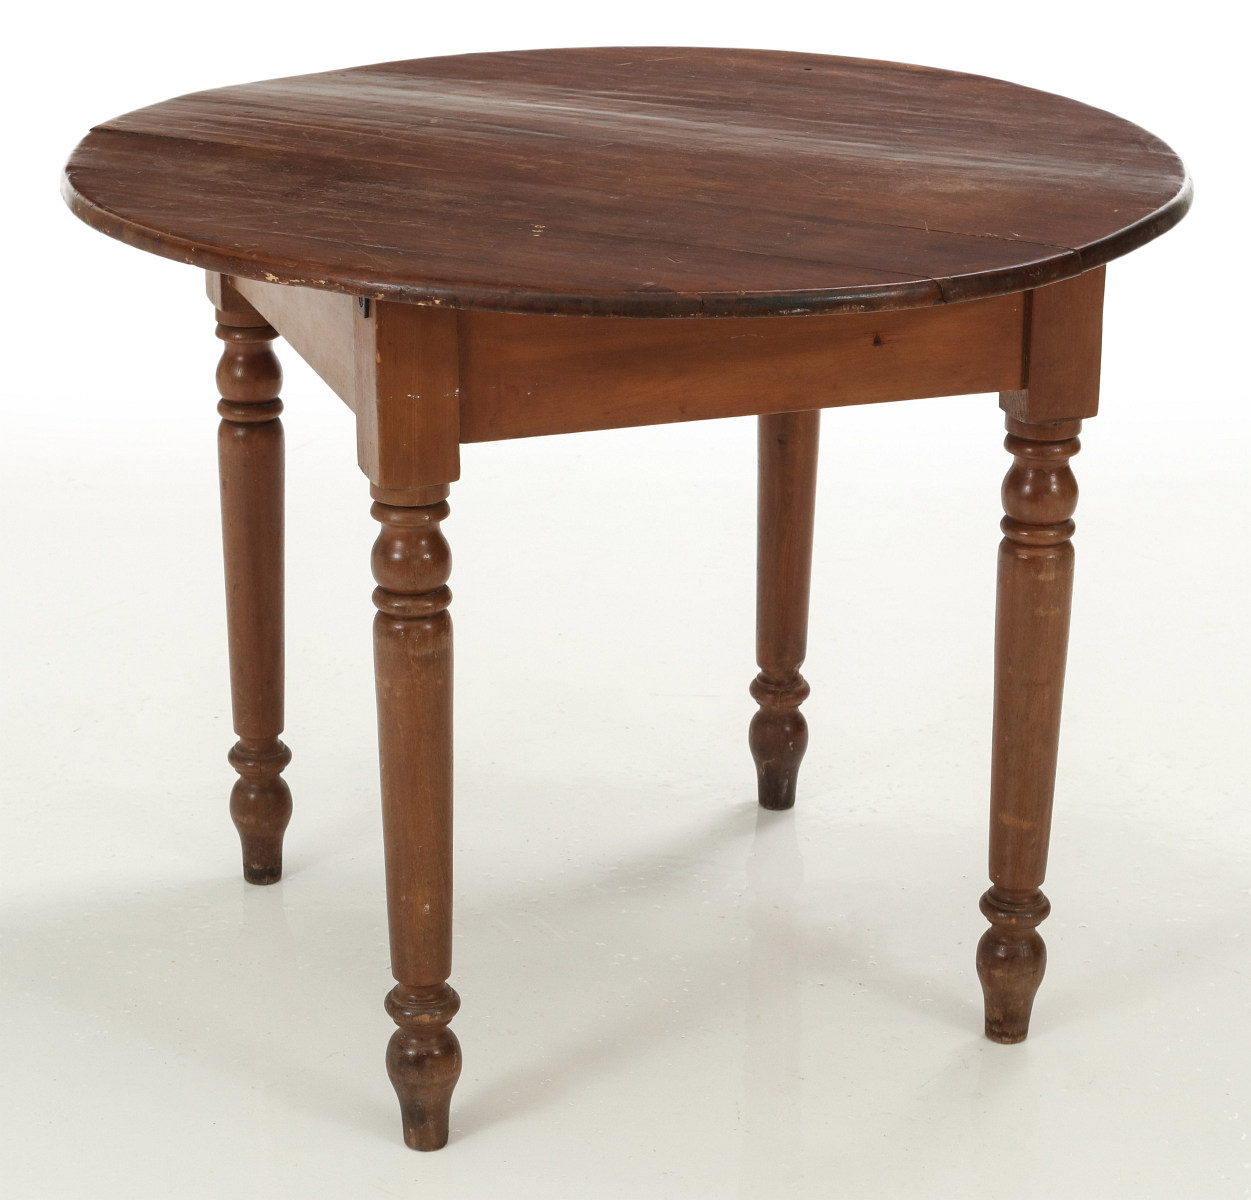 A LATE 19TH CENTURY AMERICAN KITCHEN TABLE